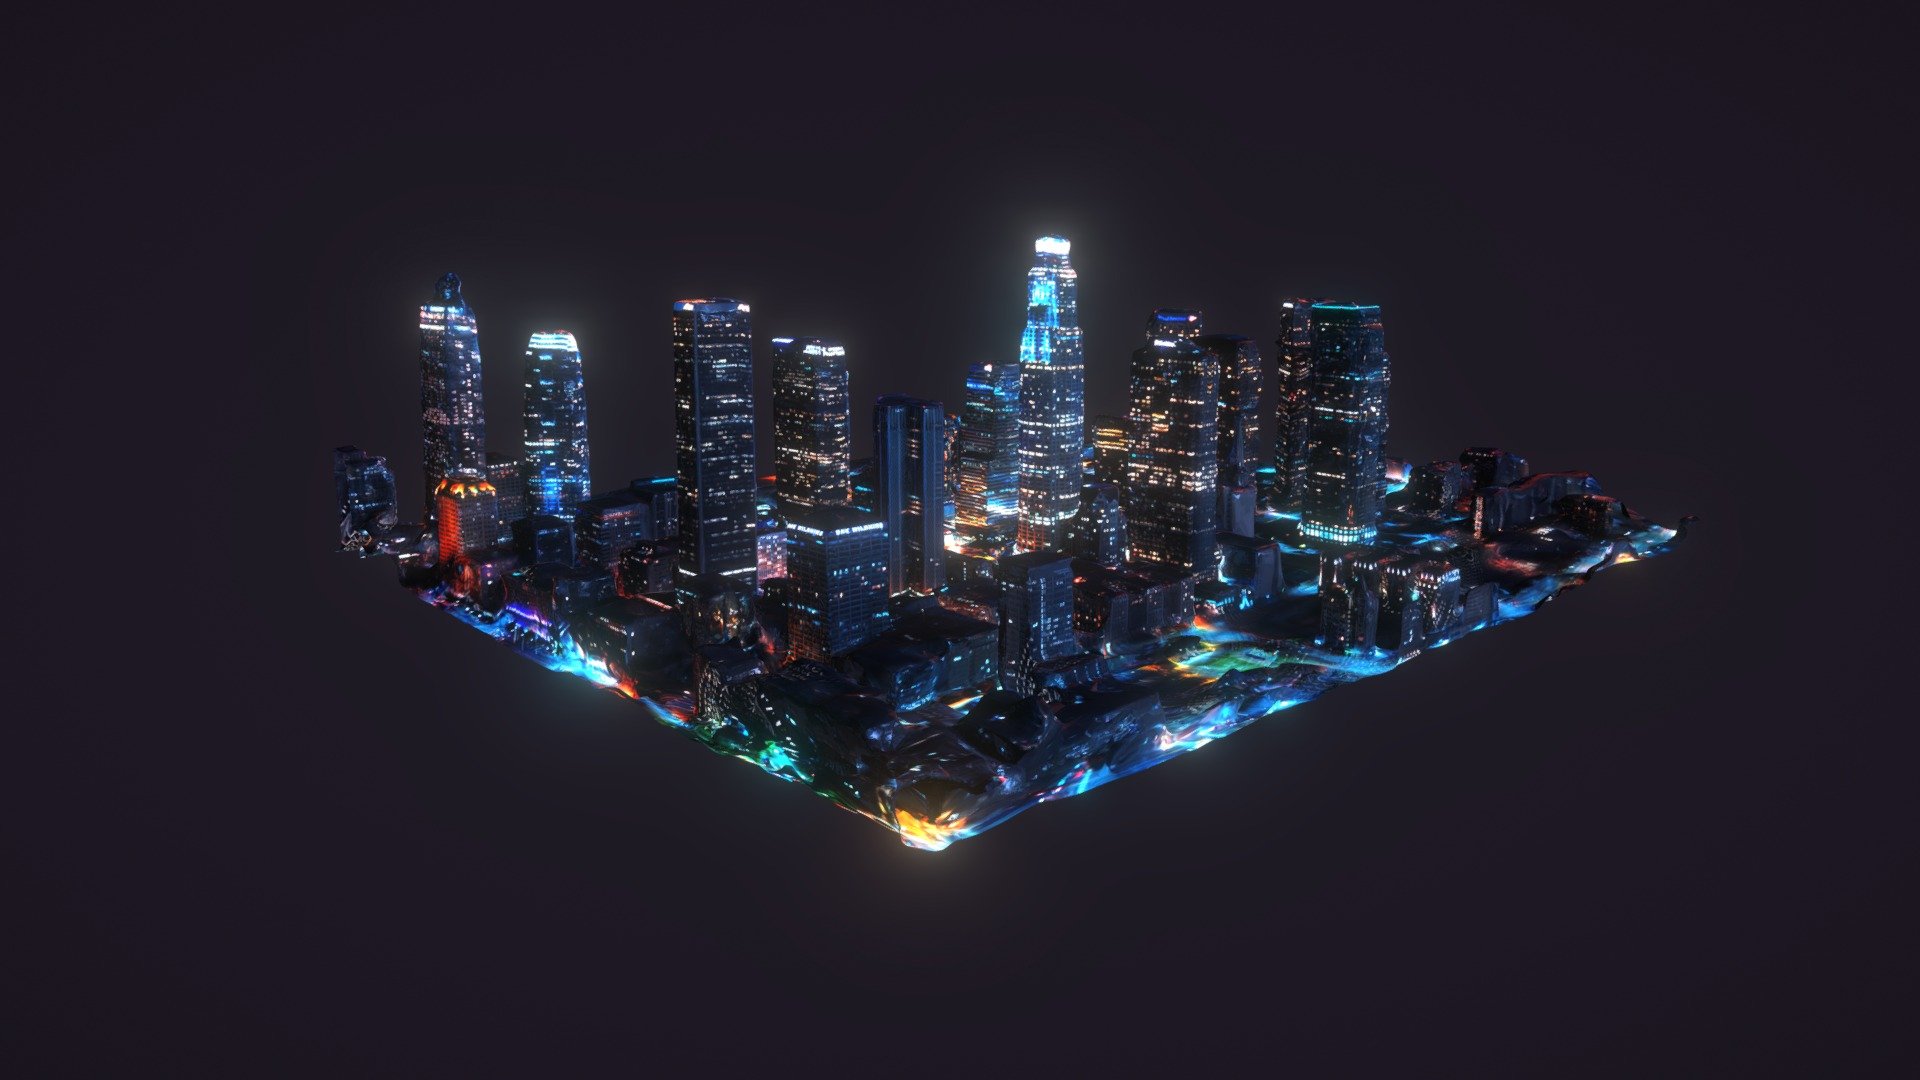 Downtown Los Angeles - City At Night.